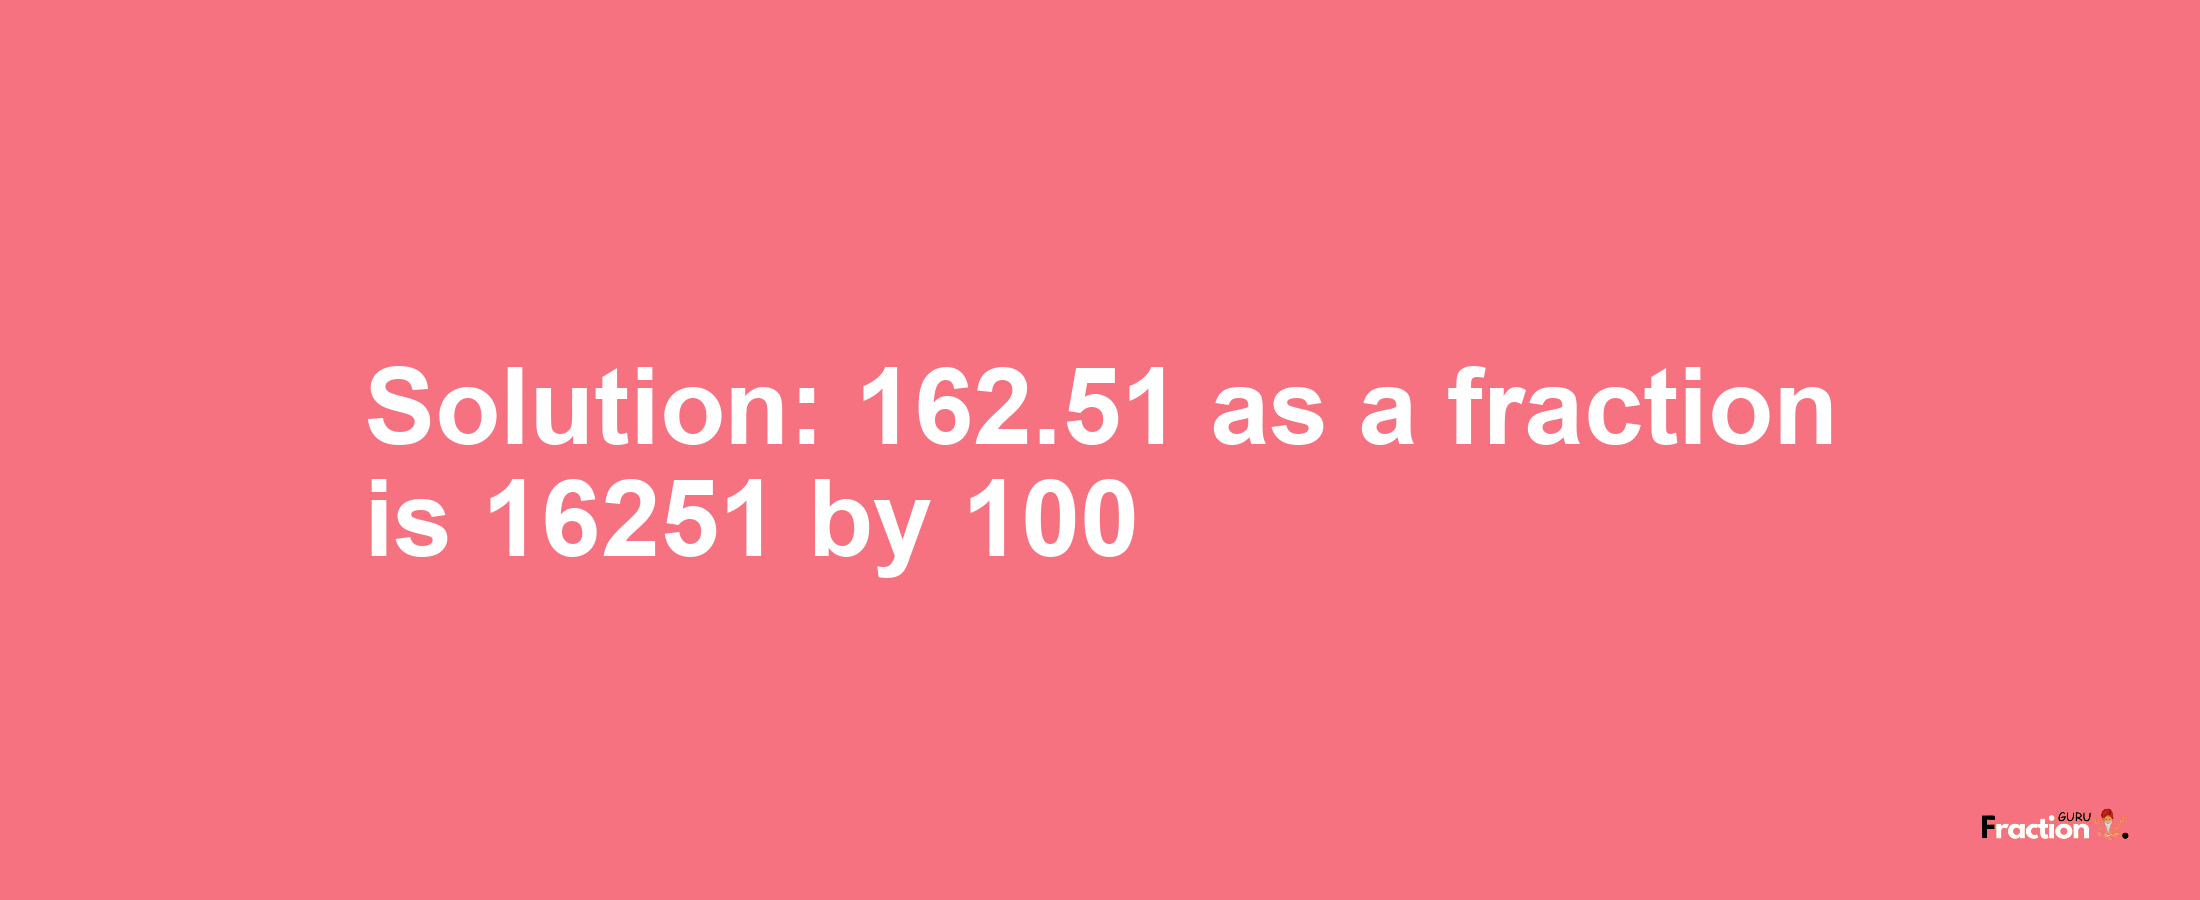 Solution:162.51 as a fraction is 16251/100